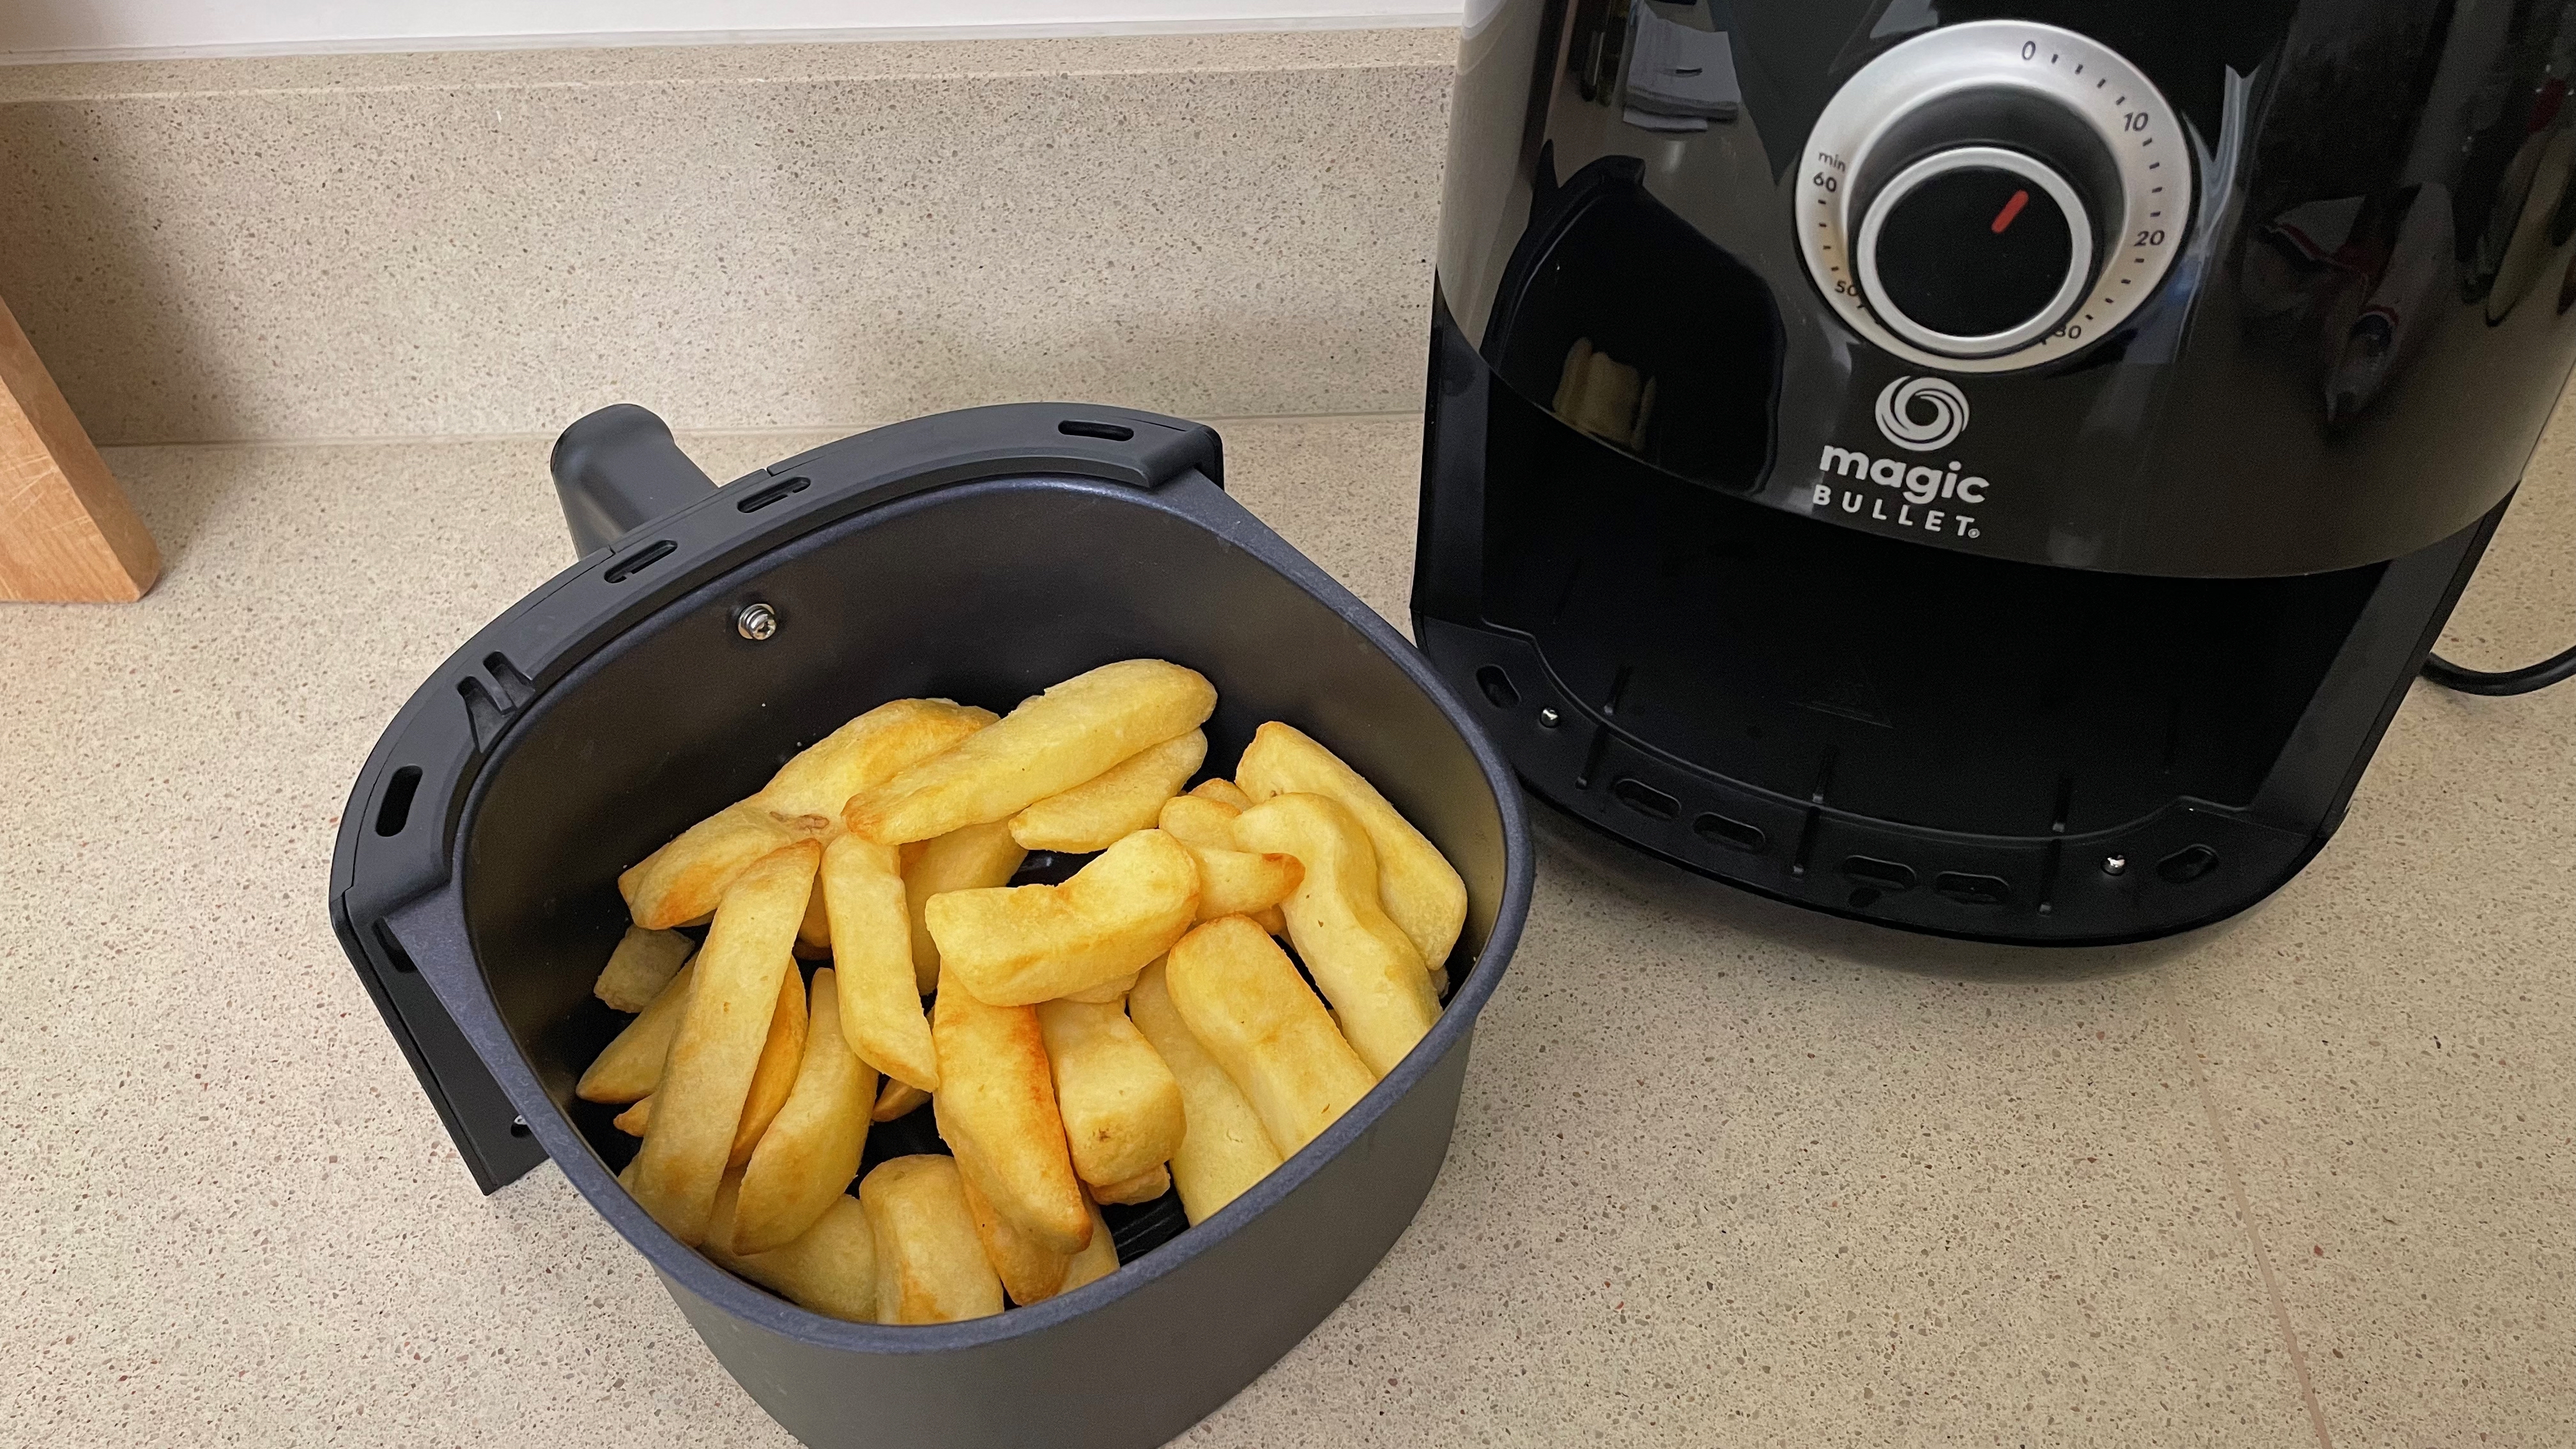 Magic Bullet Air Fryer next to tray of uncooked chips